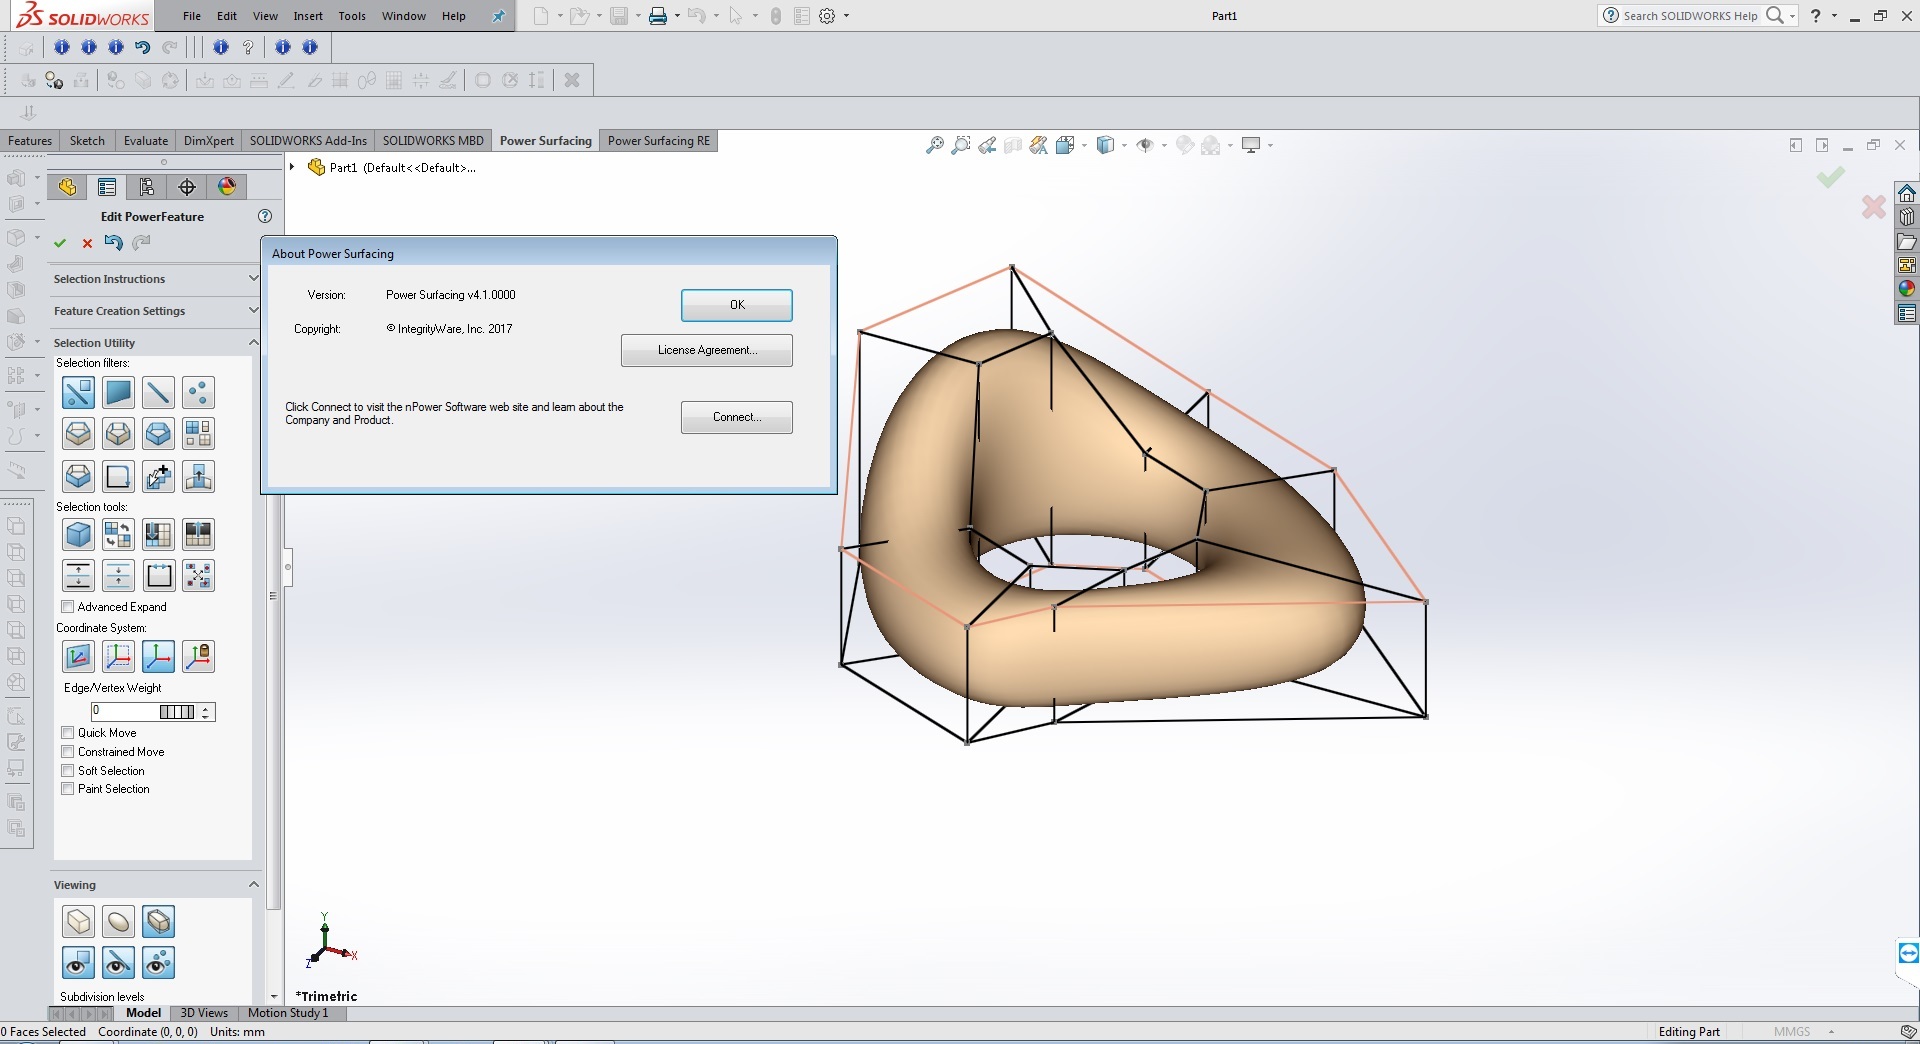 Design with PowerSurfacing RE v2.4-4.1 for SolidWorks 2012-2017 64bit